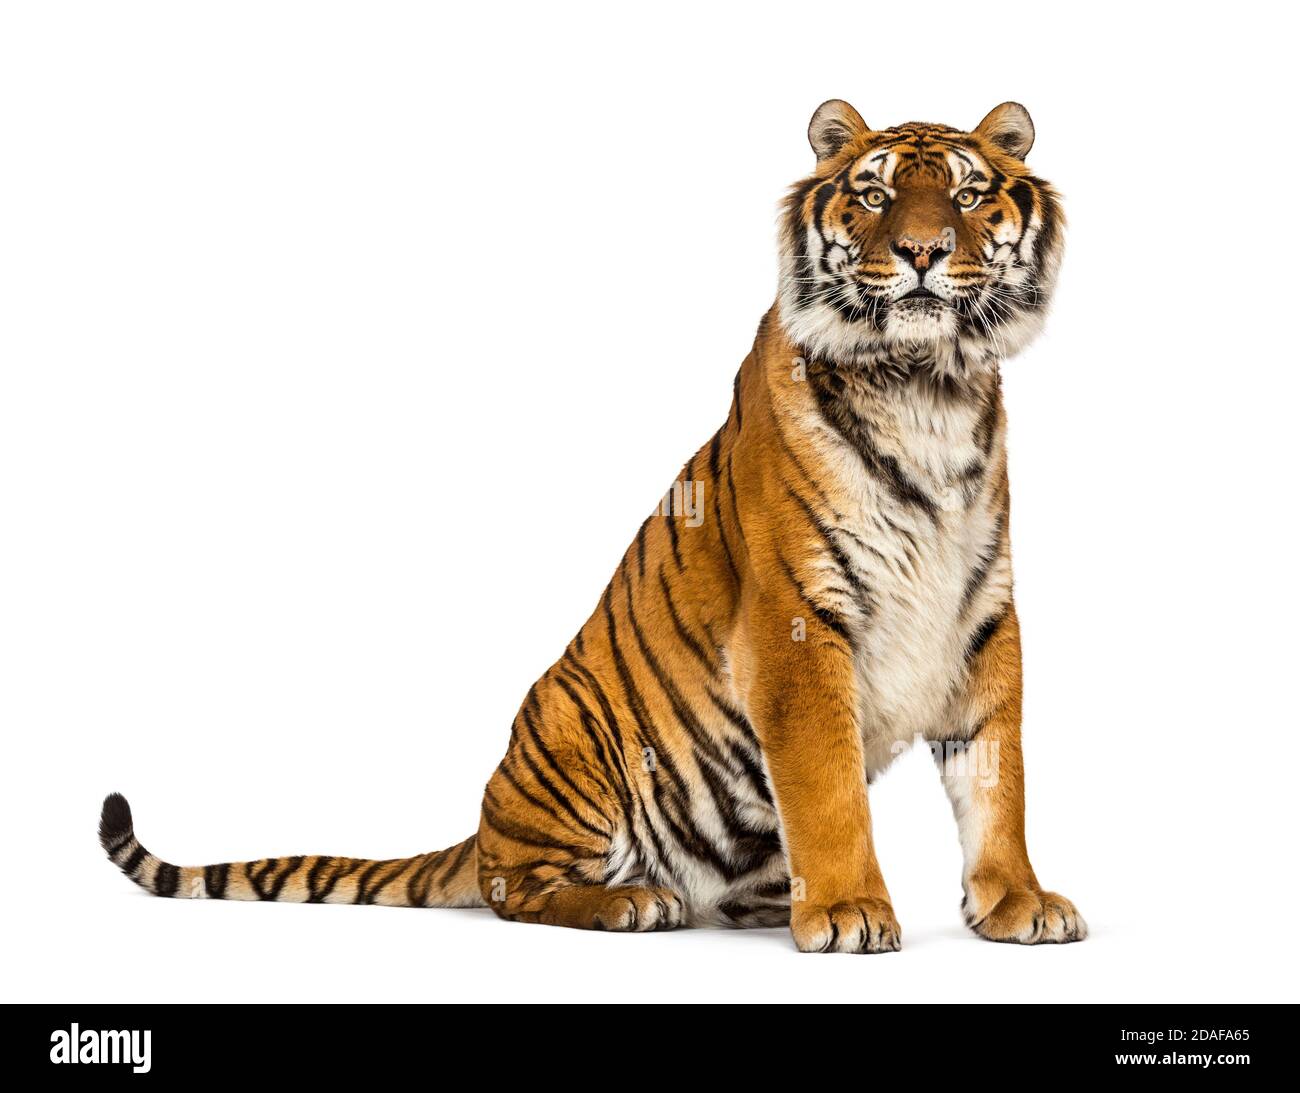 Tiger sitting looking at the camera, isolated on white Stock Photo